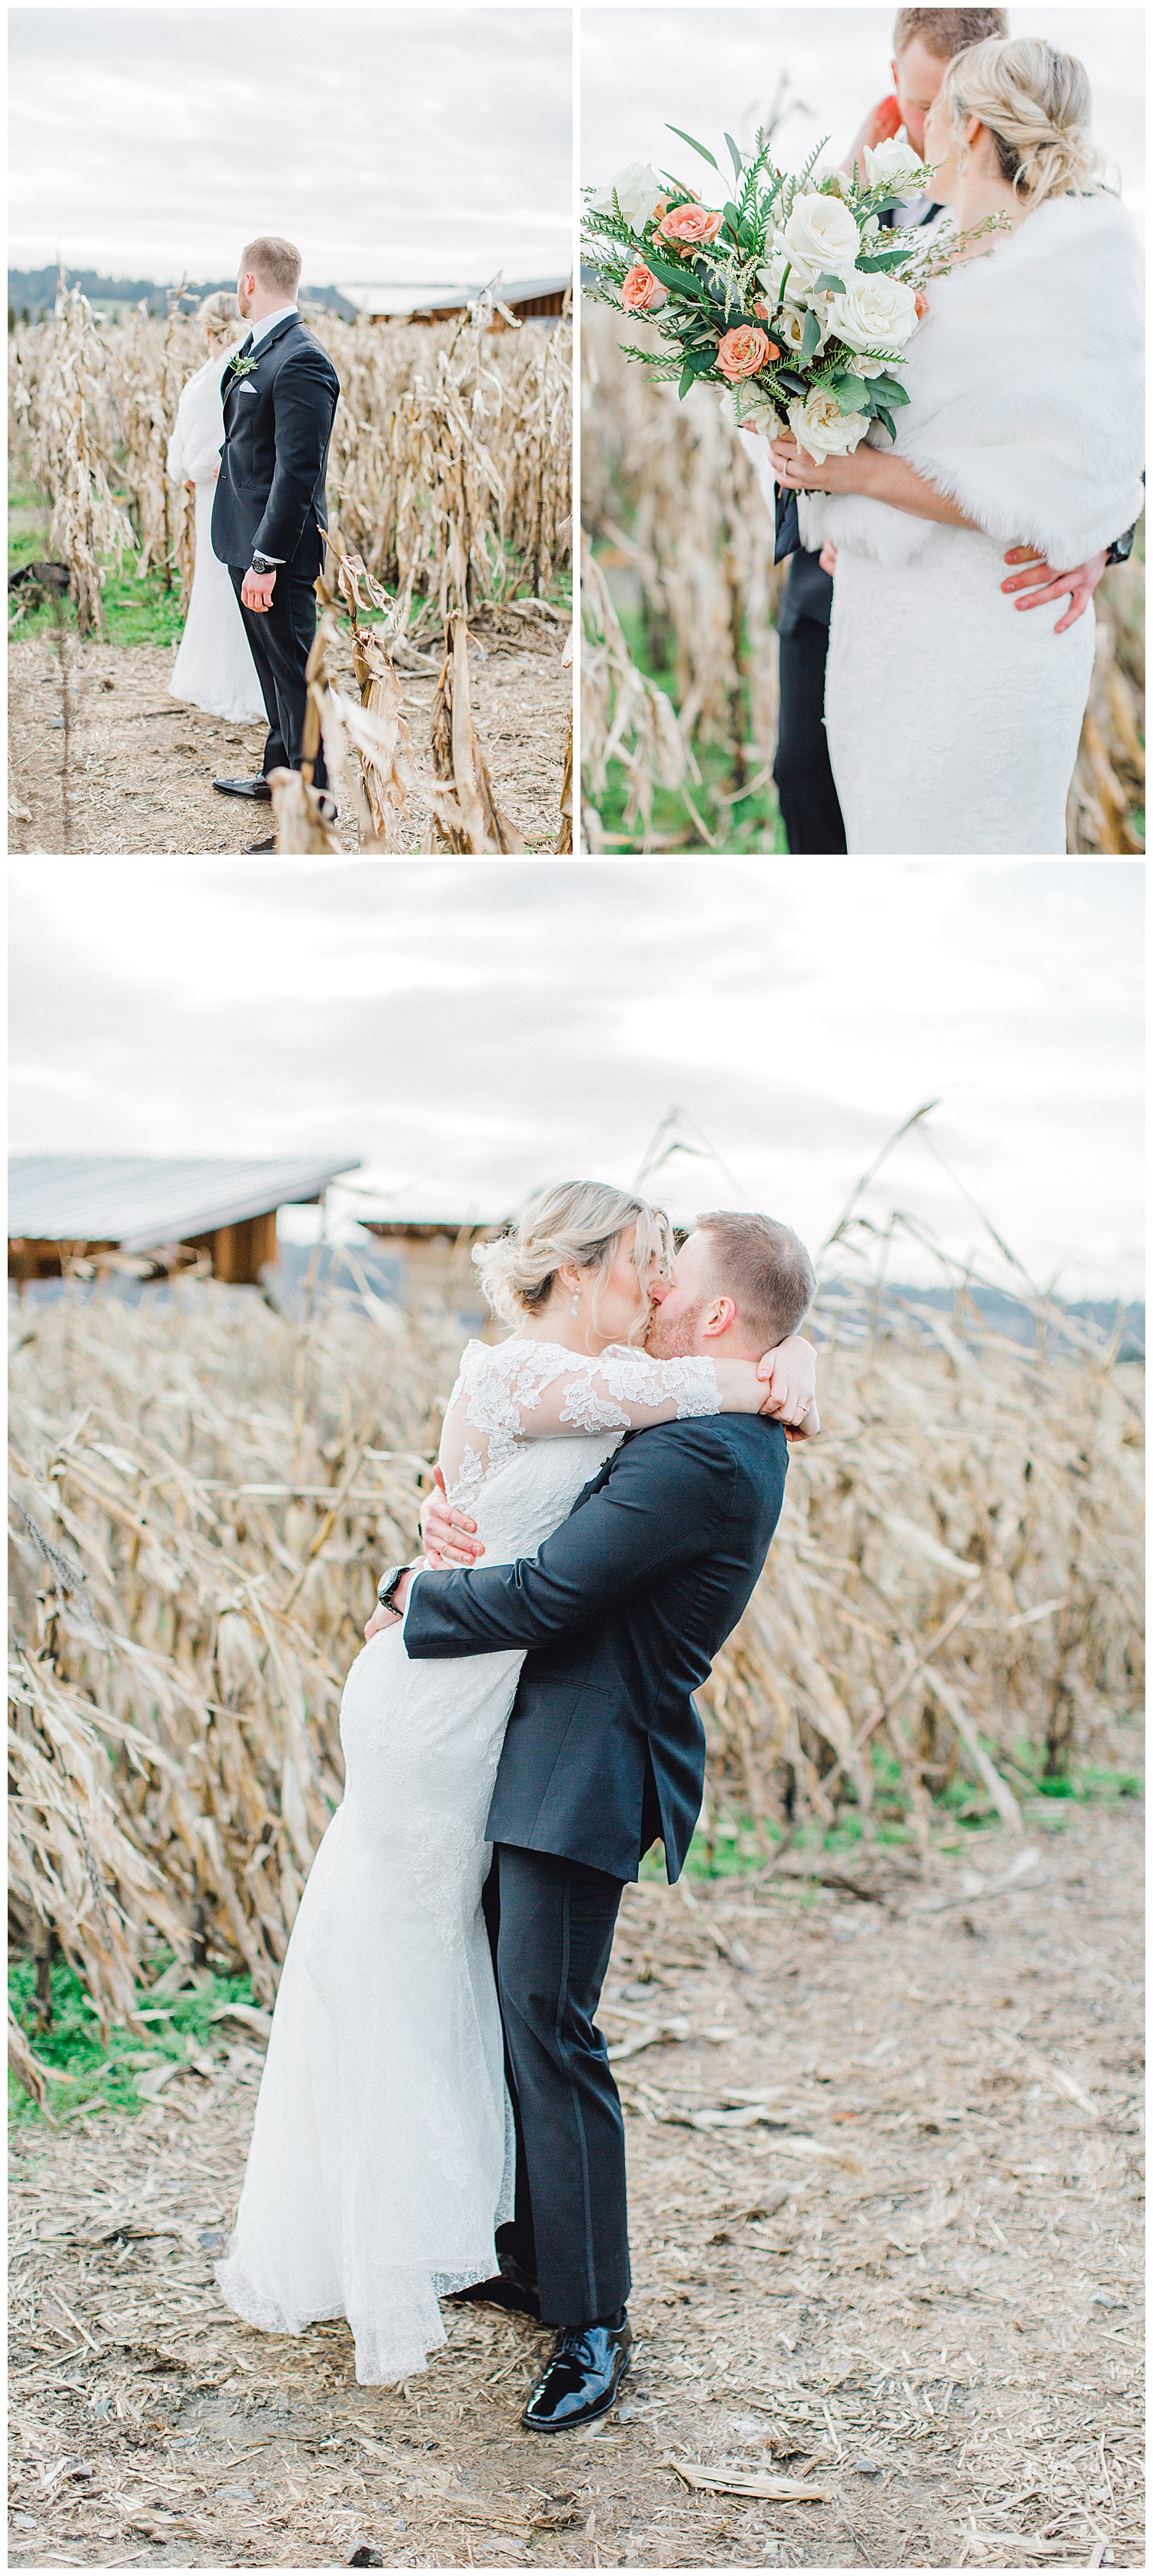 ERC-8915_A beautiful winter wedding in Snohomish, Washington at Thomas Family Farm was simply perfect.  This rustic and modern styled wedding was dripping with romance and photographed by Emma Rose Company, a pacific northwest wedding photographer..jpg